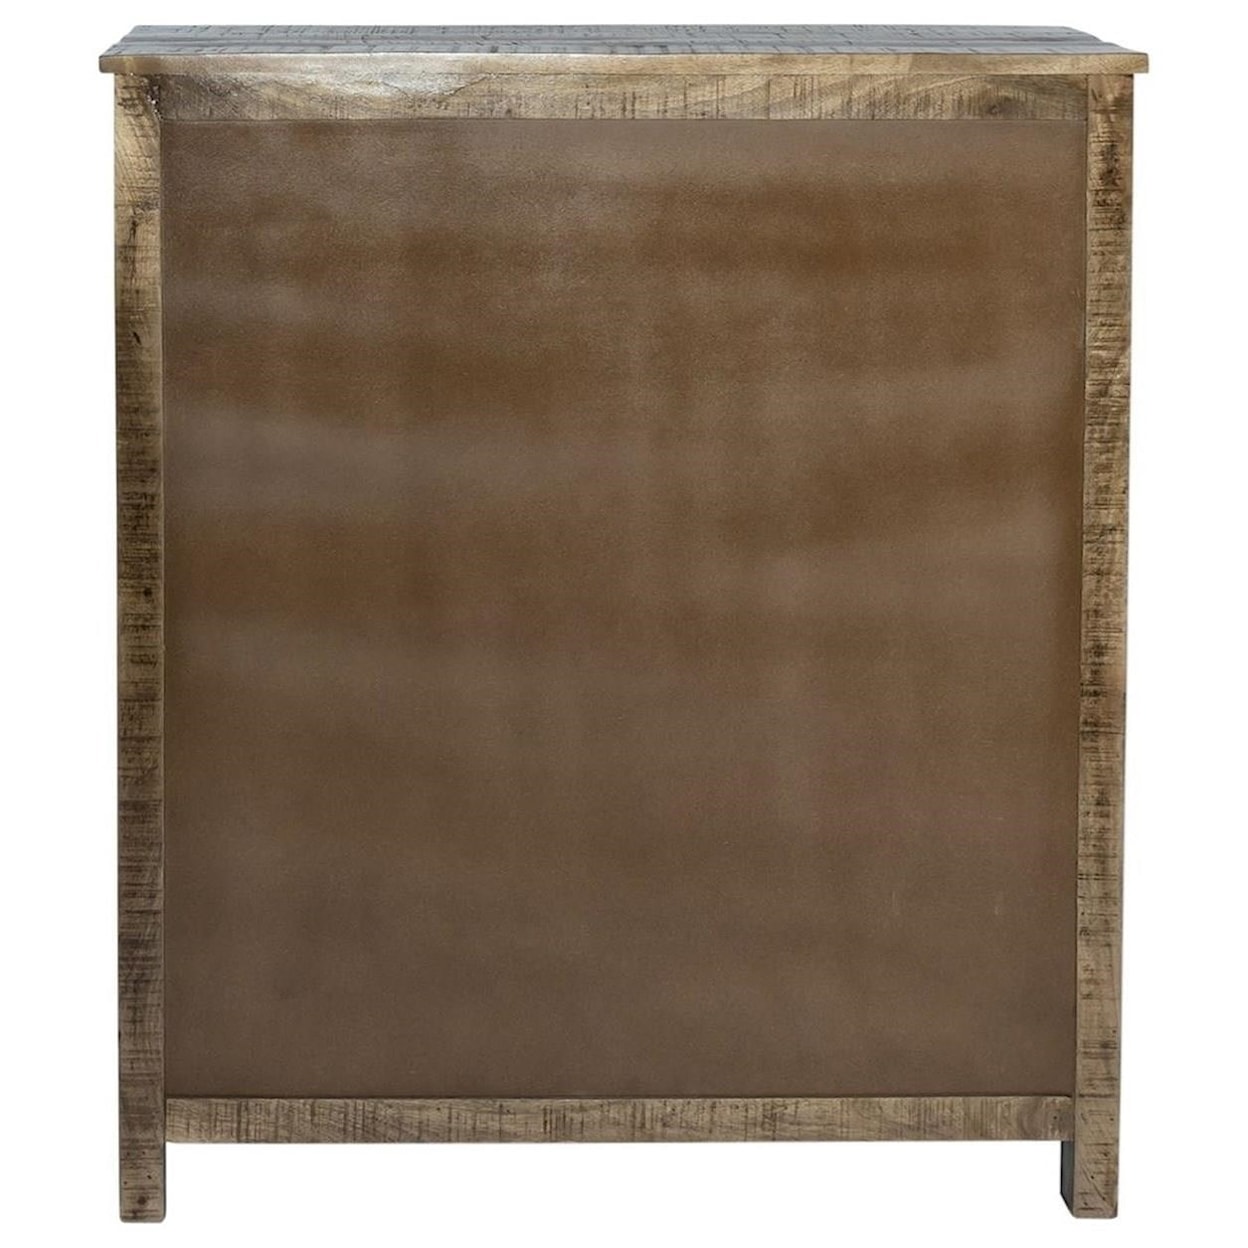 Libby Emerson Wine Accent Cabinet